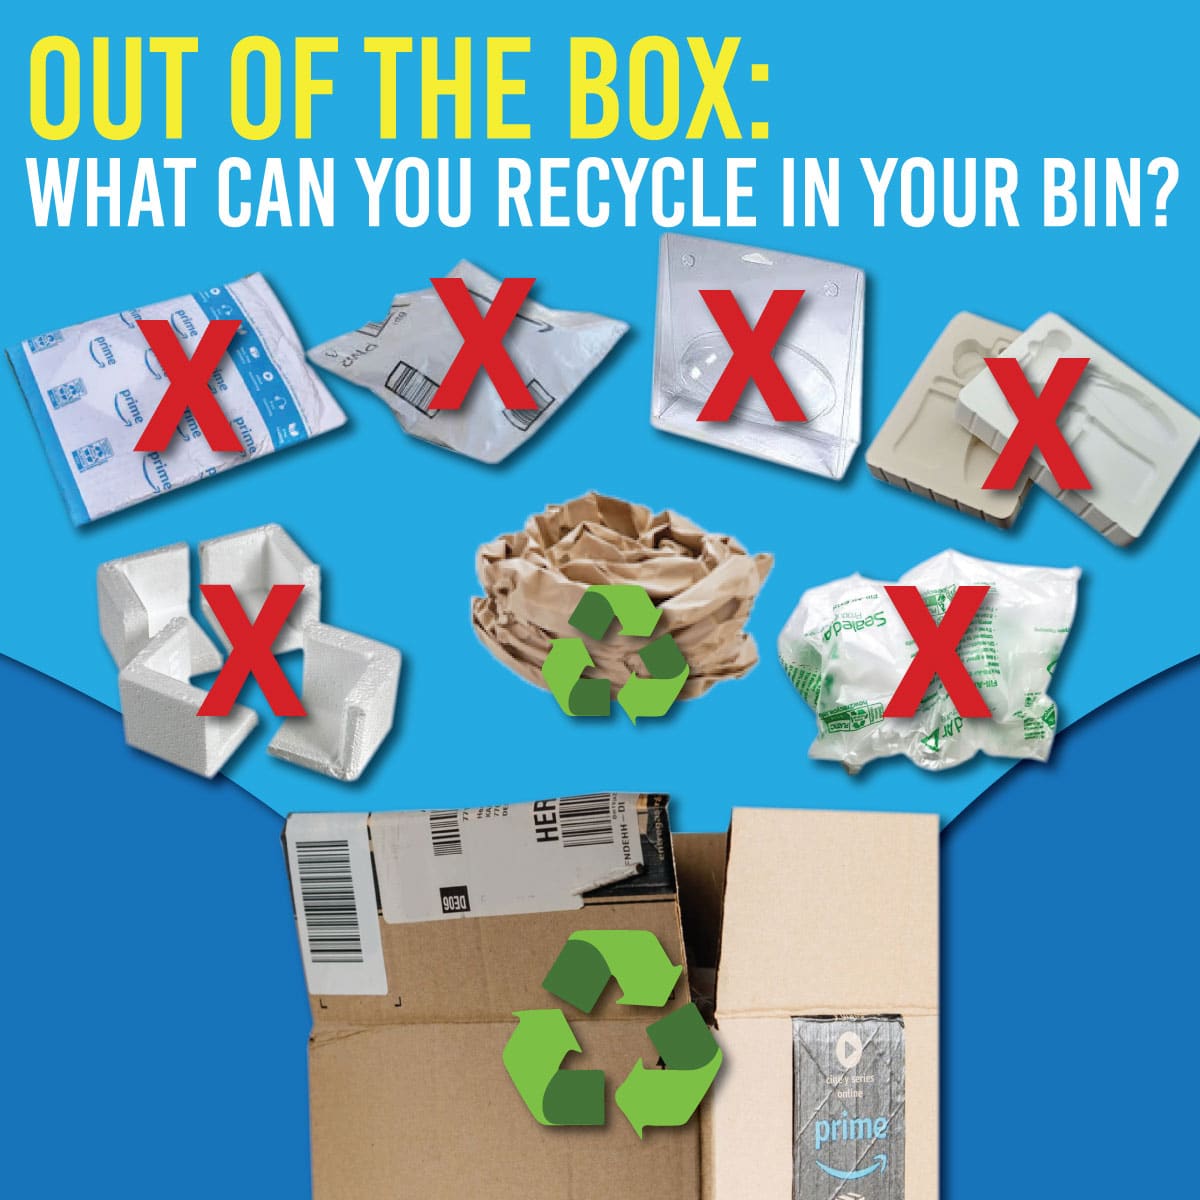  Yes - No packaging, is it recyclable?